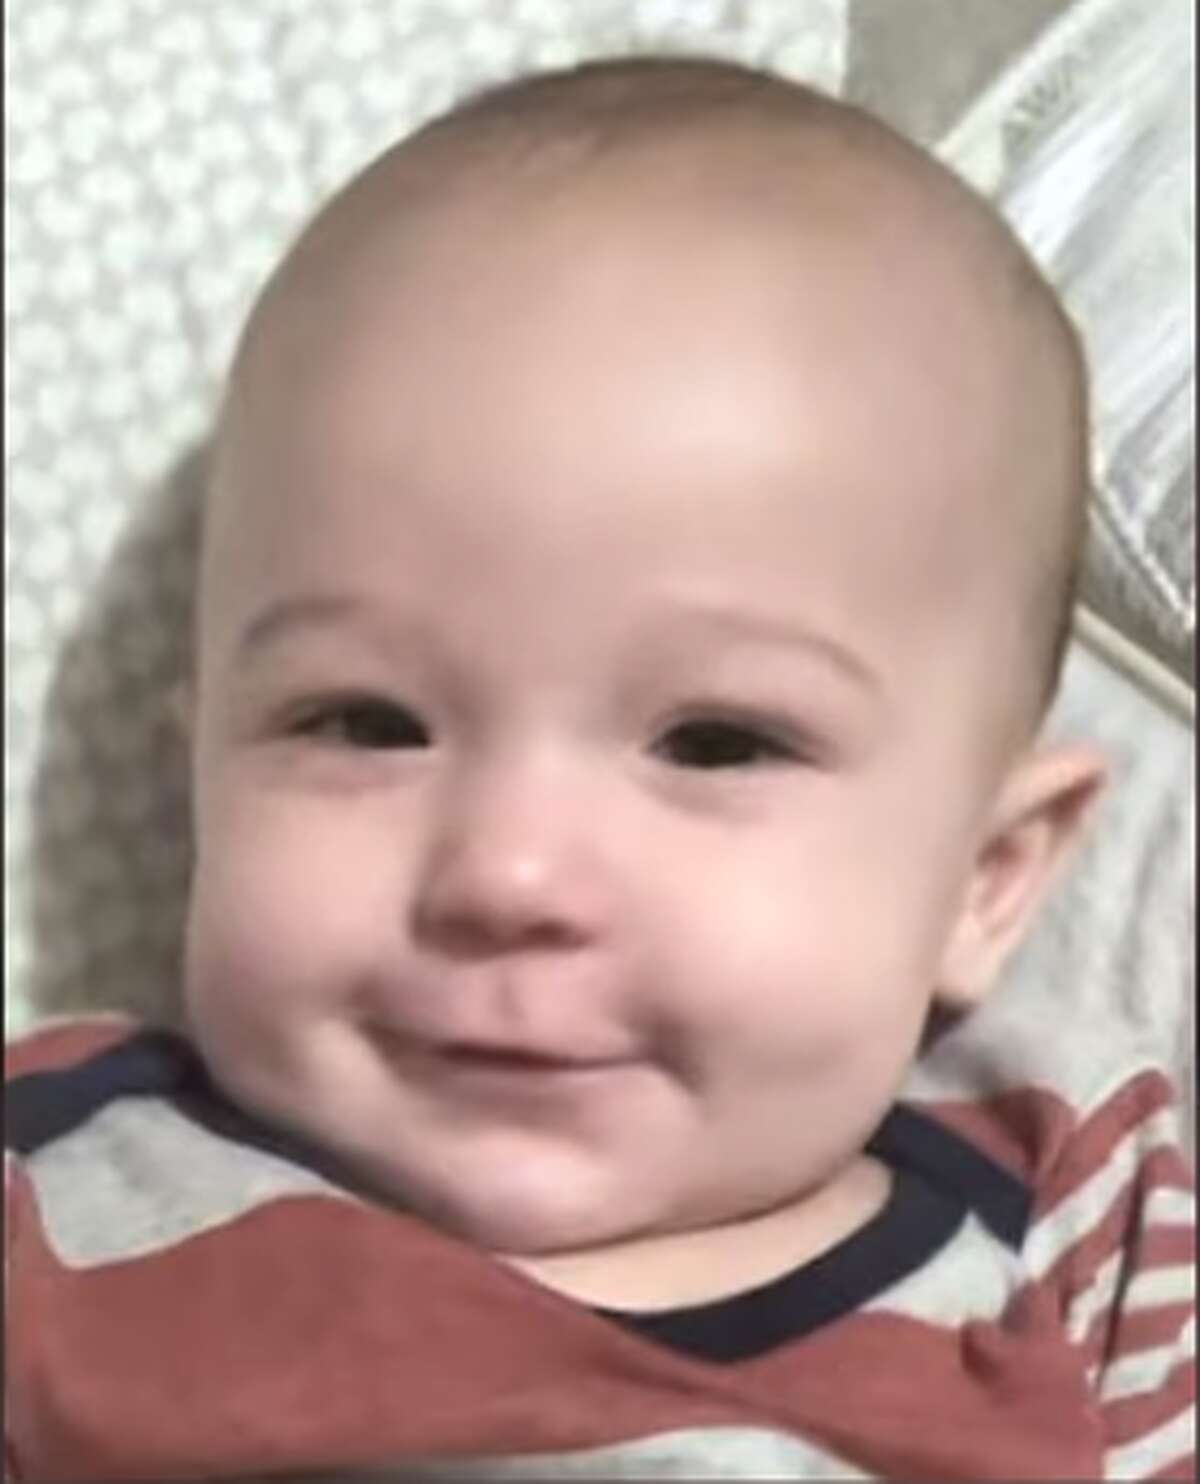 Authorities are for a missing 6-month-old Odessa infant that was last seen on Jan.11. According to authorities, Danny'Ray Couch may be in Midland. 